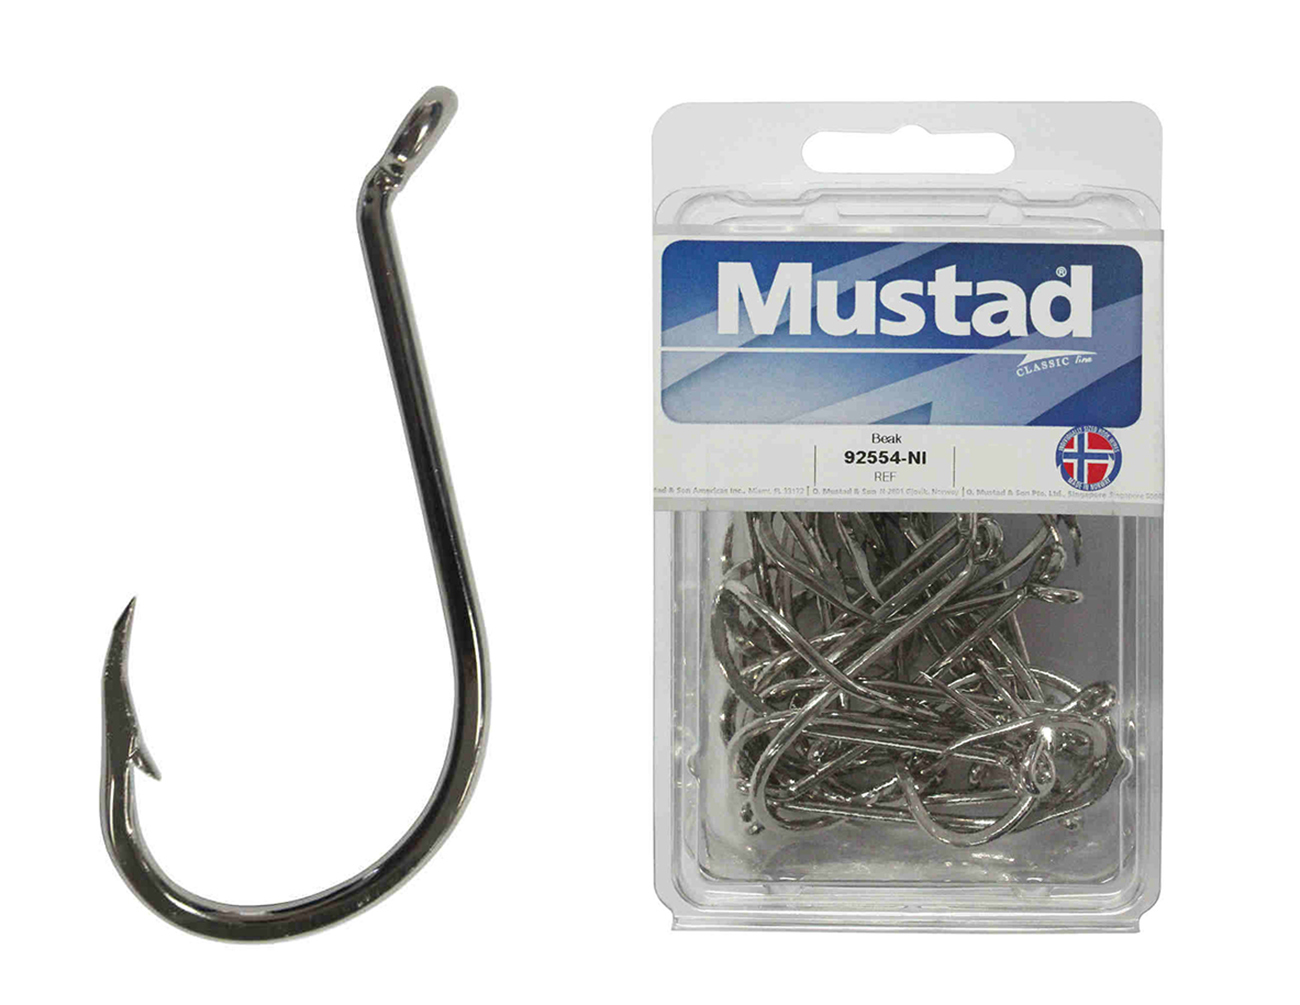 Mustad 92554 - Size 1 Qty 50 - Beak Hook Suicide 2x Strong